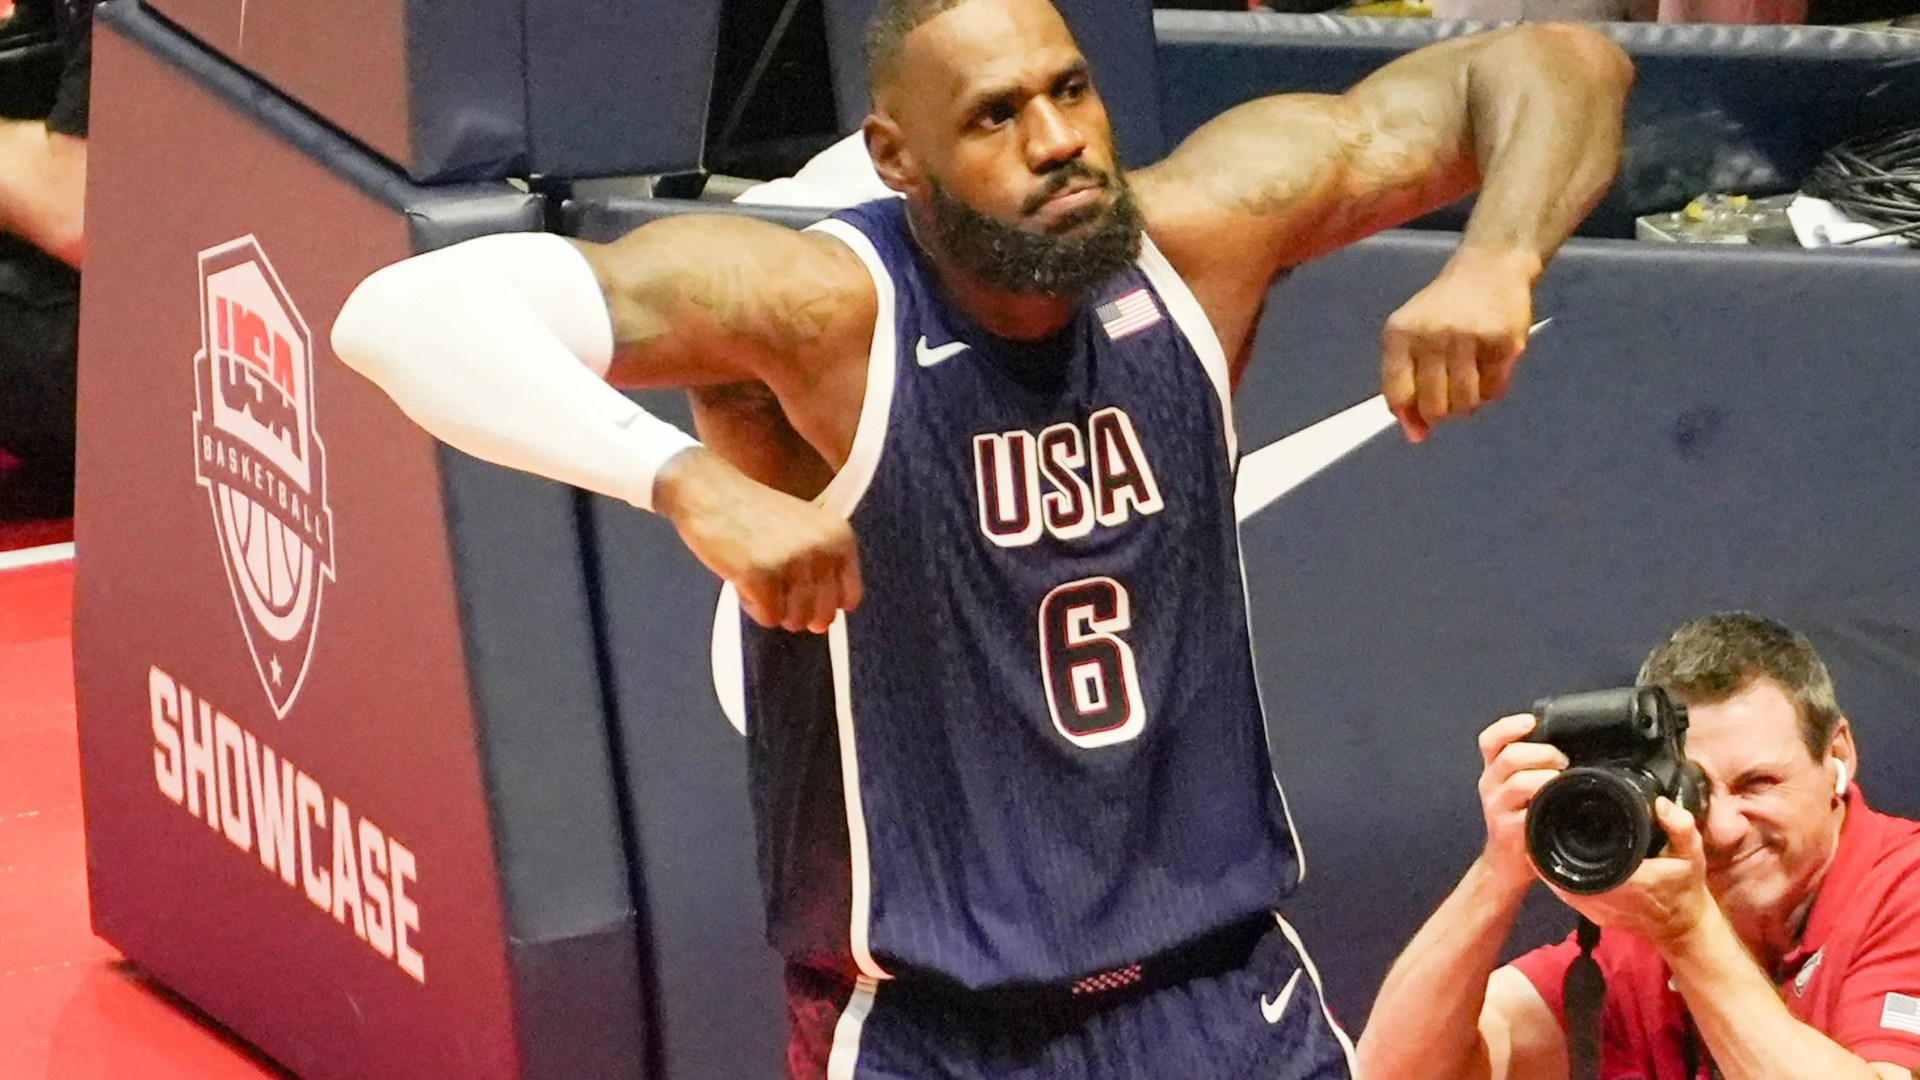 ‘It felt brand new’ admits LeBron James after returning to city of last Olympic triumph and being named USA flag bearer [Video]